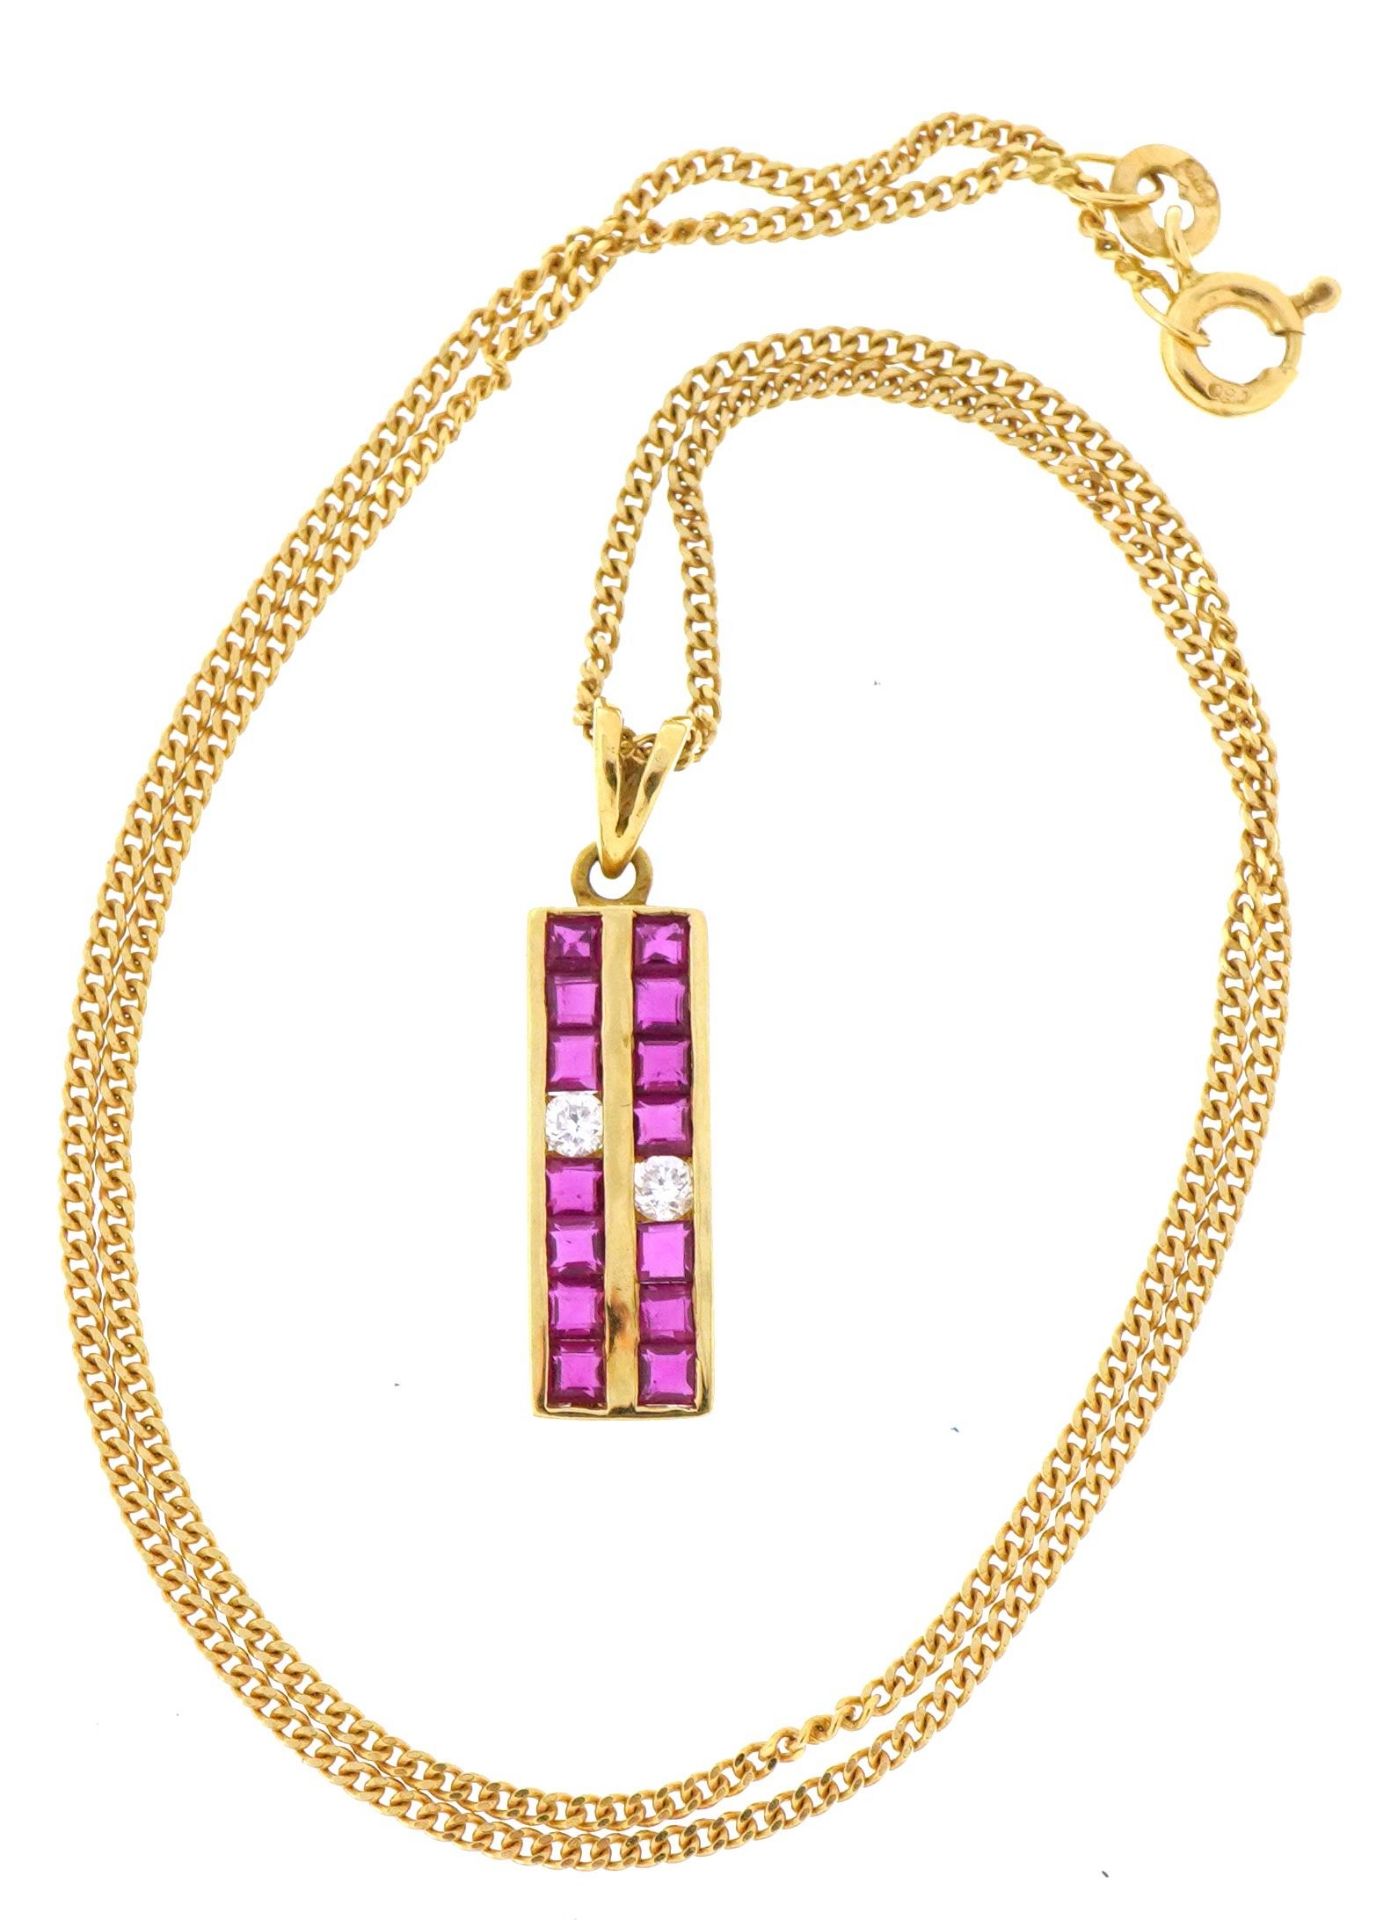 18ct gold ruby and diamond pendant on 18ct gold curb link necklace, 2.6cm high and 38cm in length, - Image 2 of 4